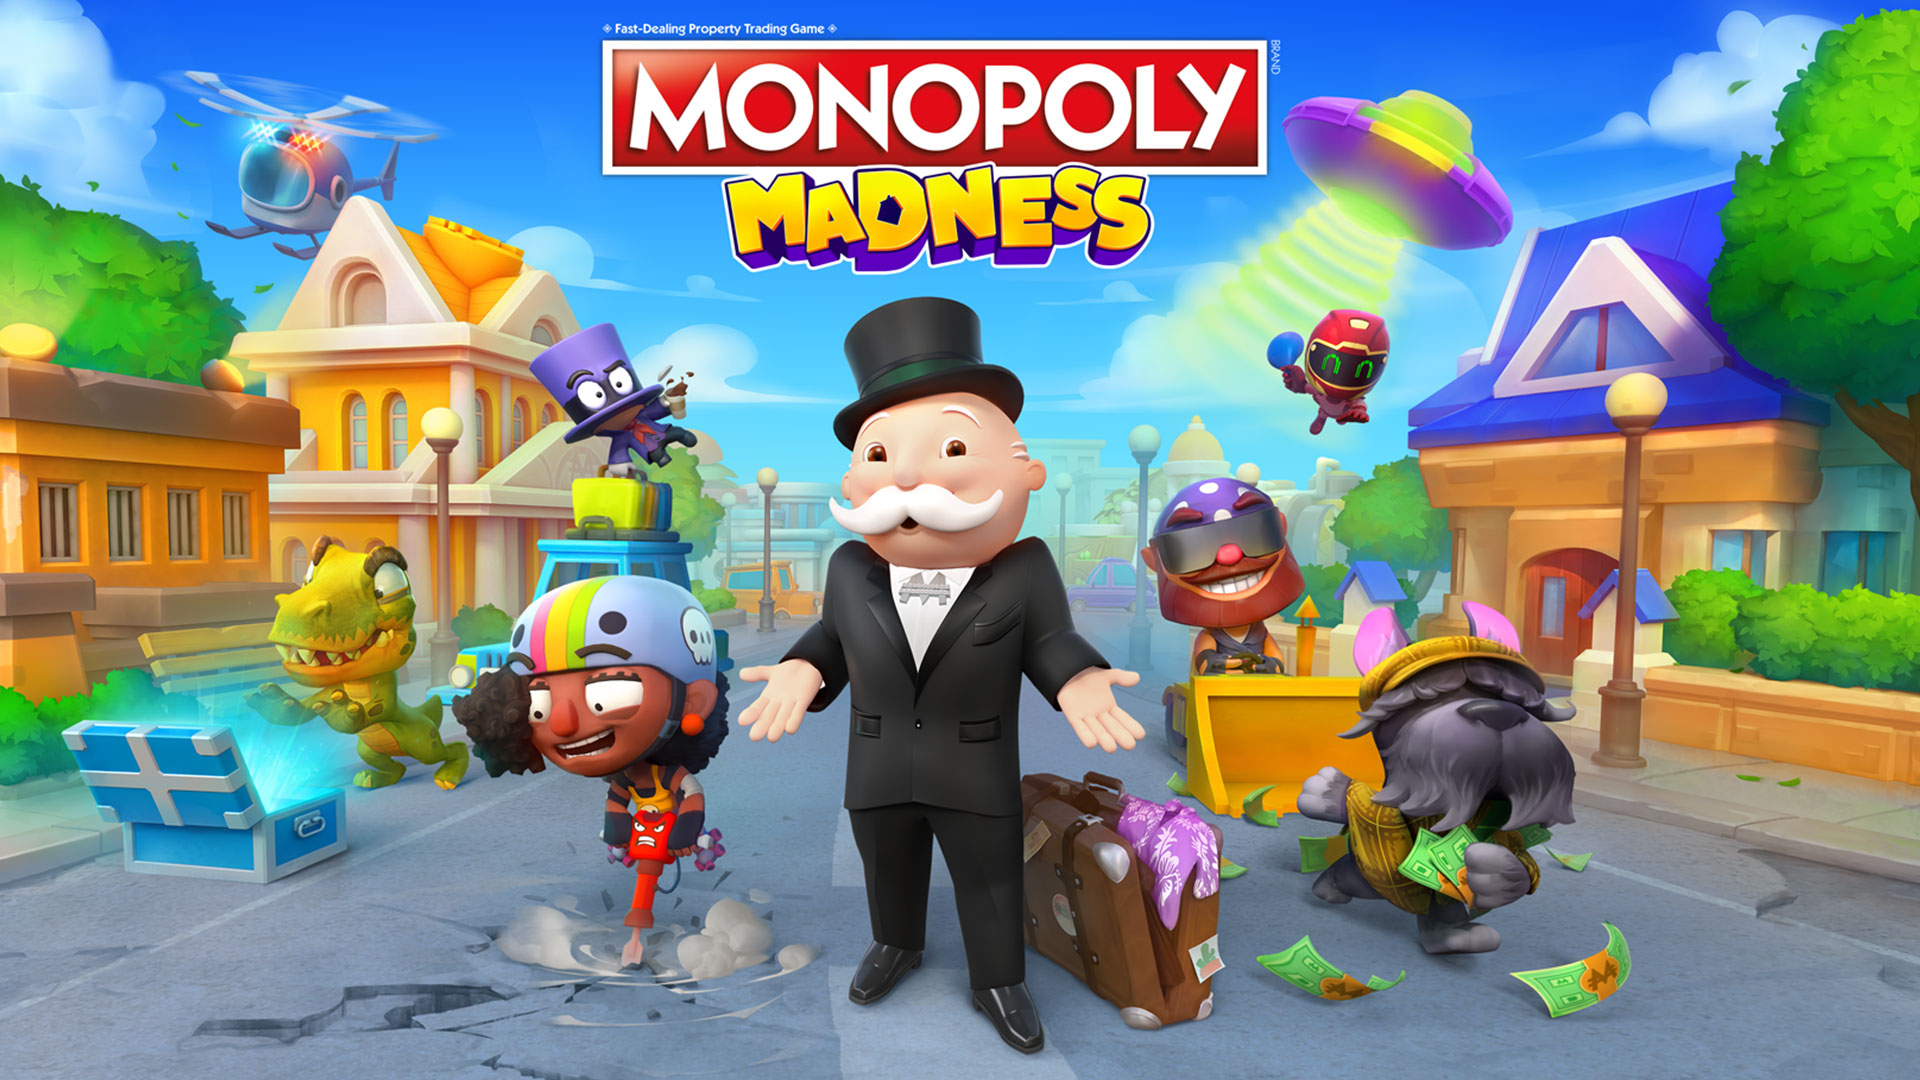 Monopoly - Download Free Games 